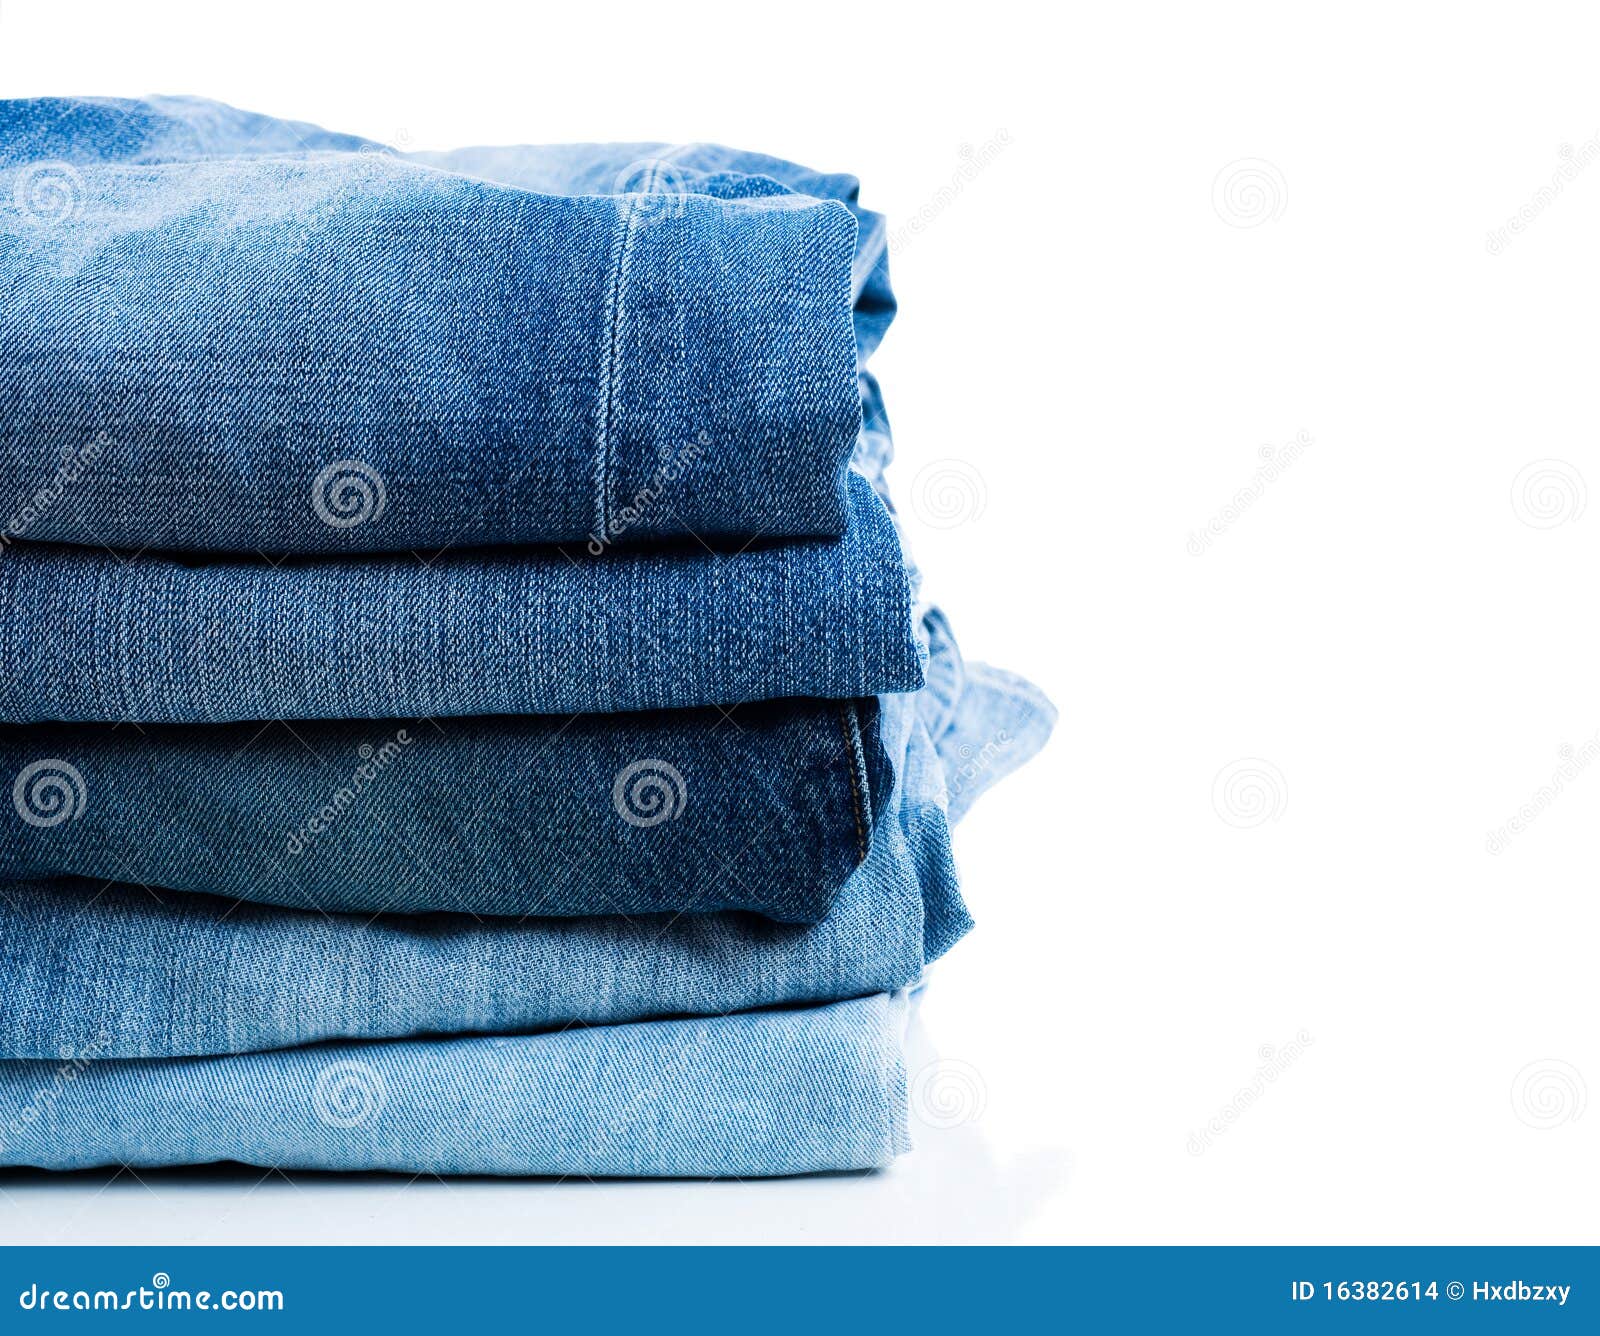 Stack of blue jeans stock photo. Image of cotton, cowboy - 16382614